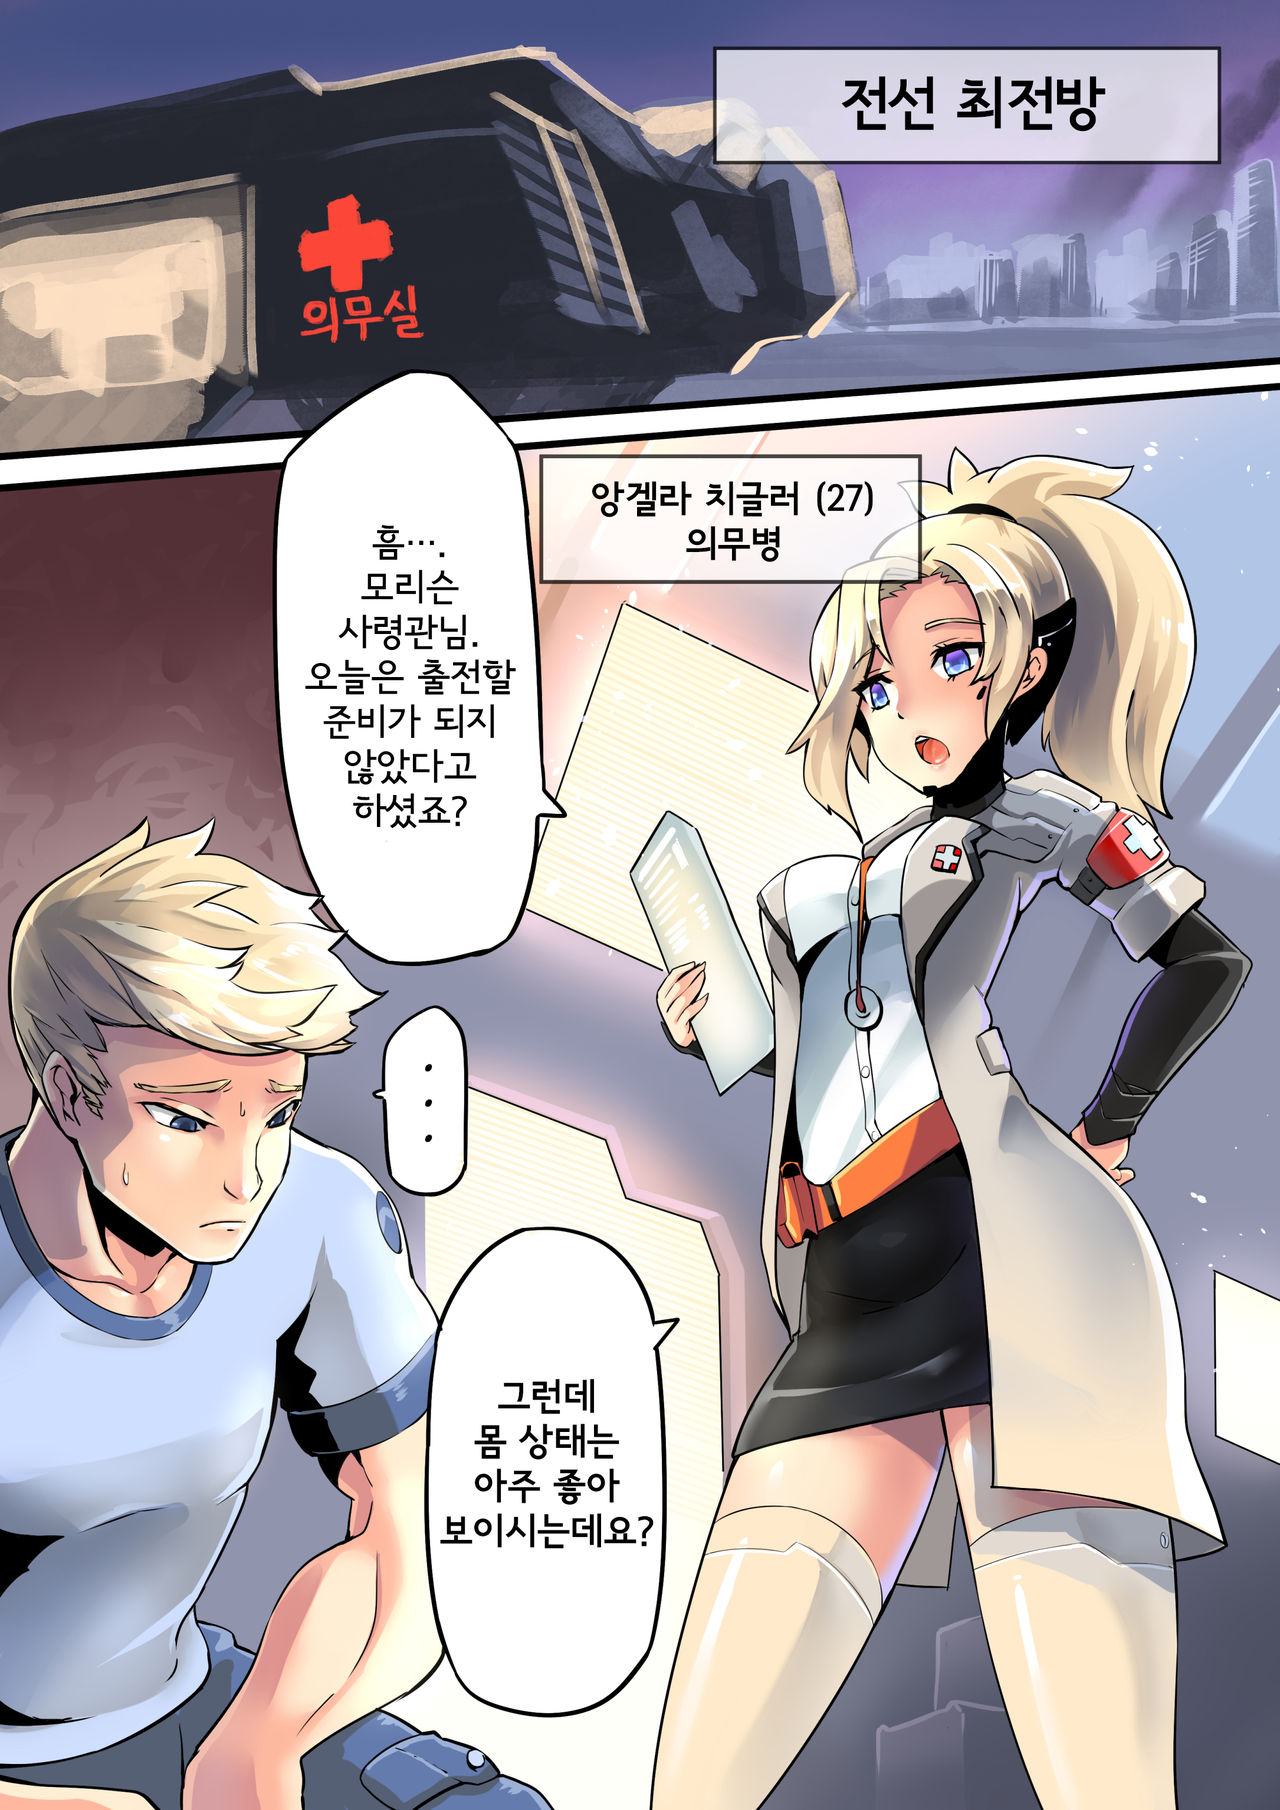 [HM] Mercy Therapy (Overwatch) [Korean] 